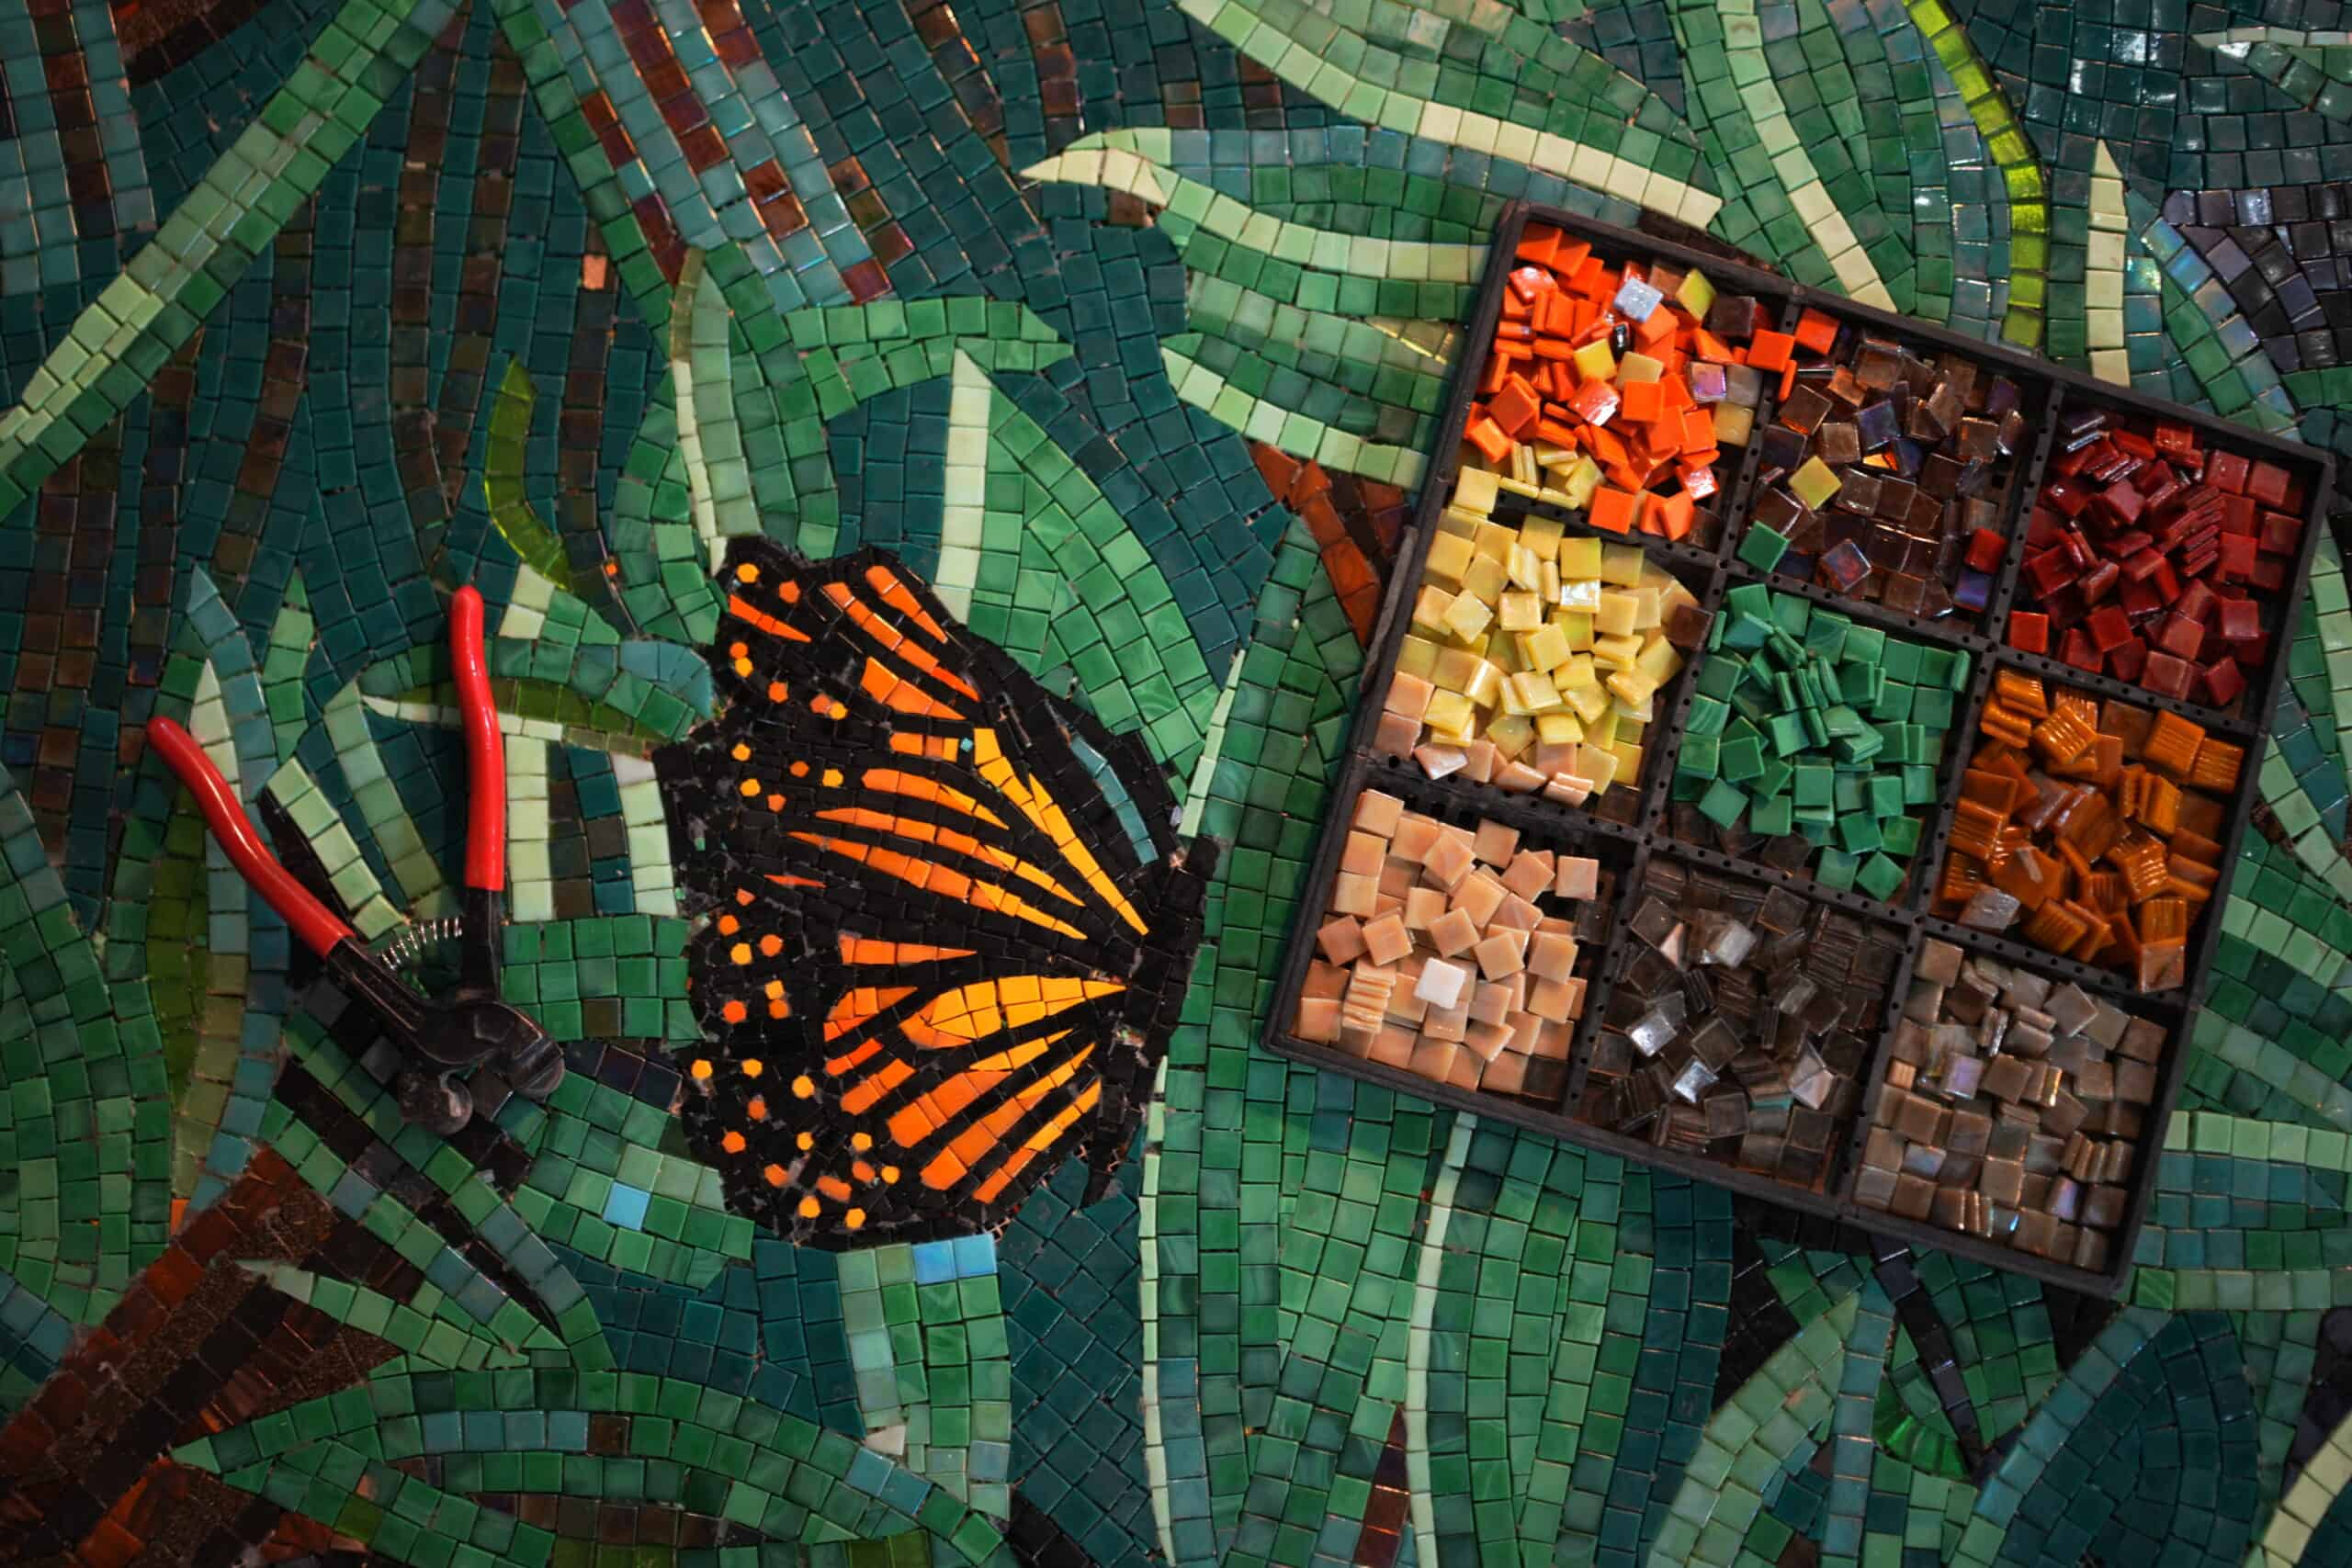 glass mosaic mural making behind the scenes. Green leaves, butterfly and glass mosaic tiles